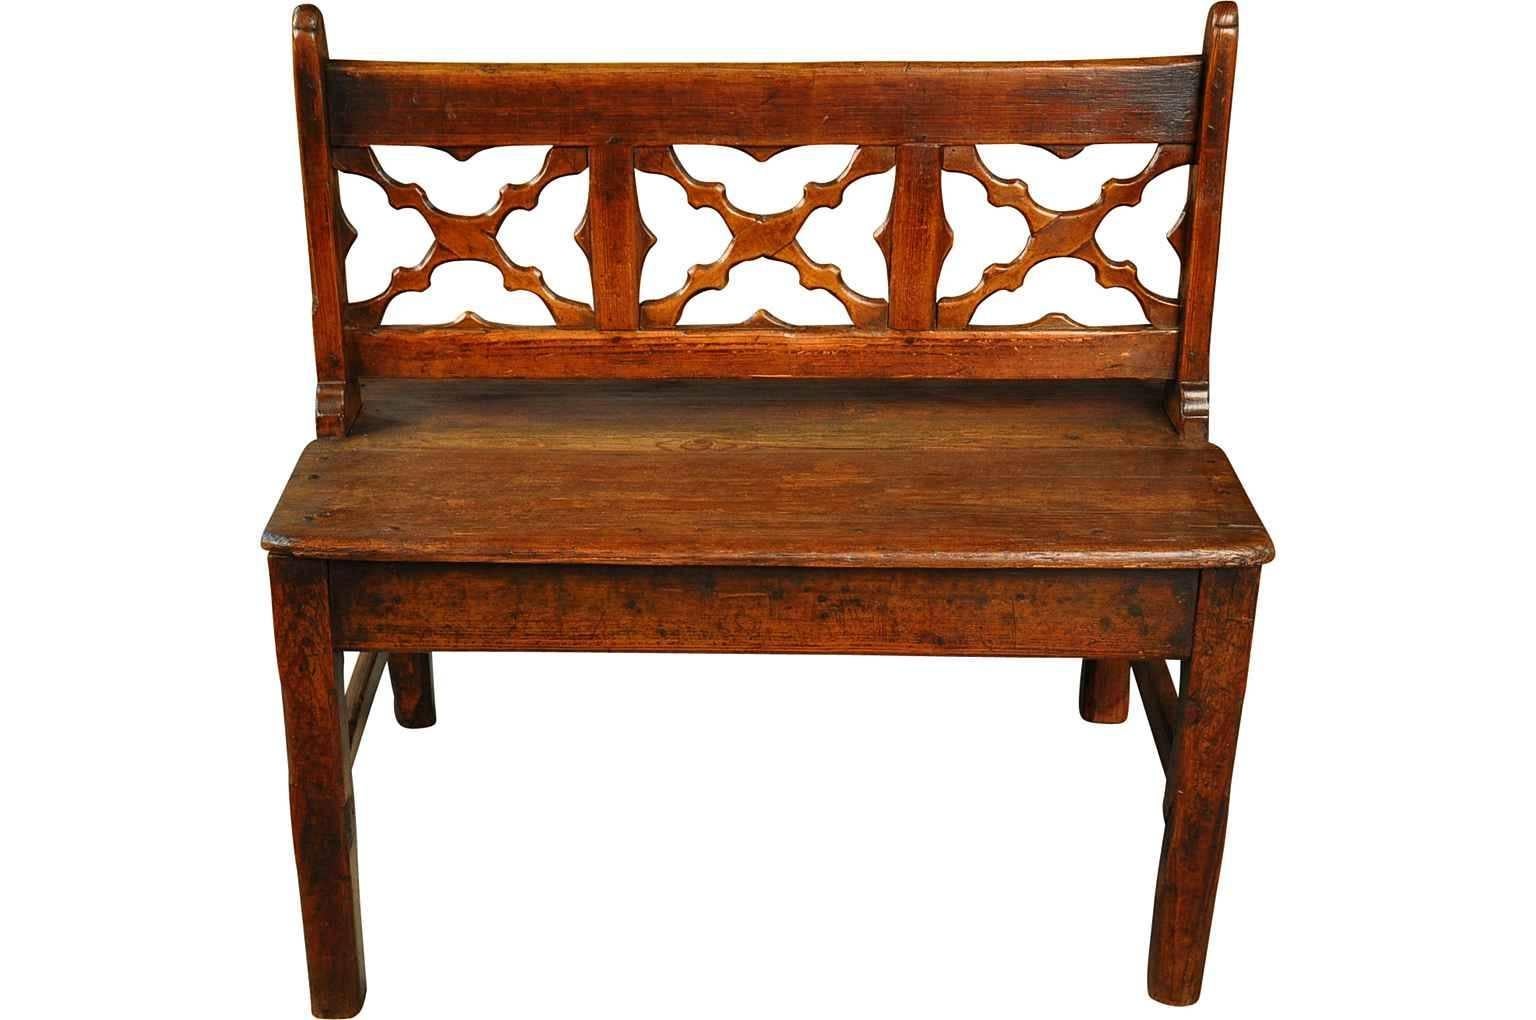 A very charming and very unique double sided banquette from the South of France. Wonderfully constructed from walnut and pine with an open lattice back. A terrific accent piece.